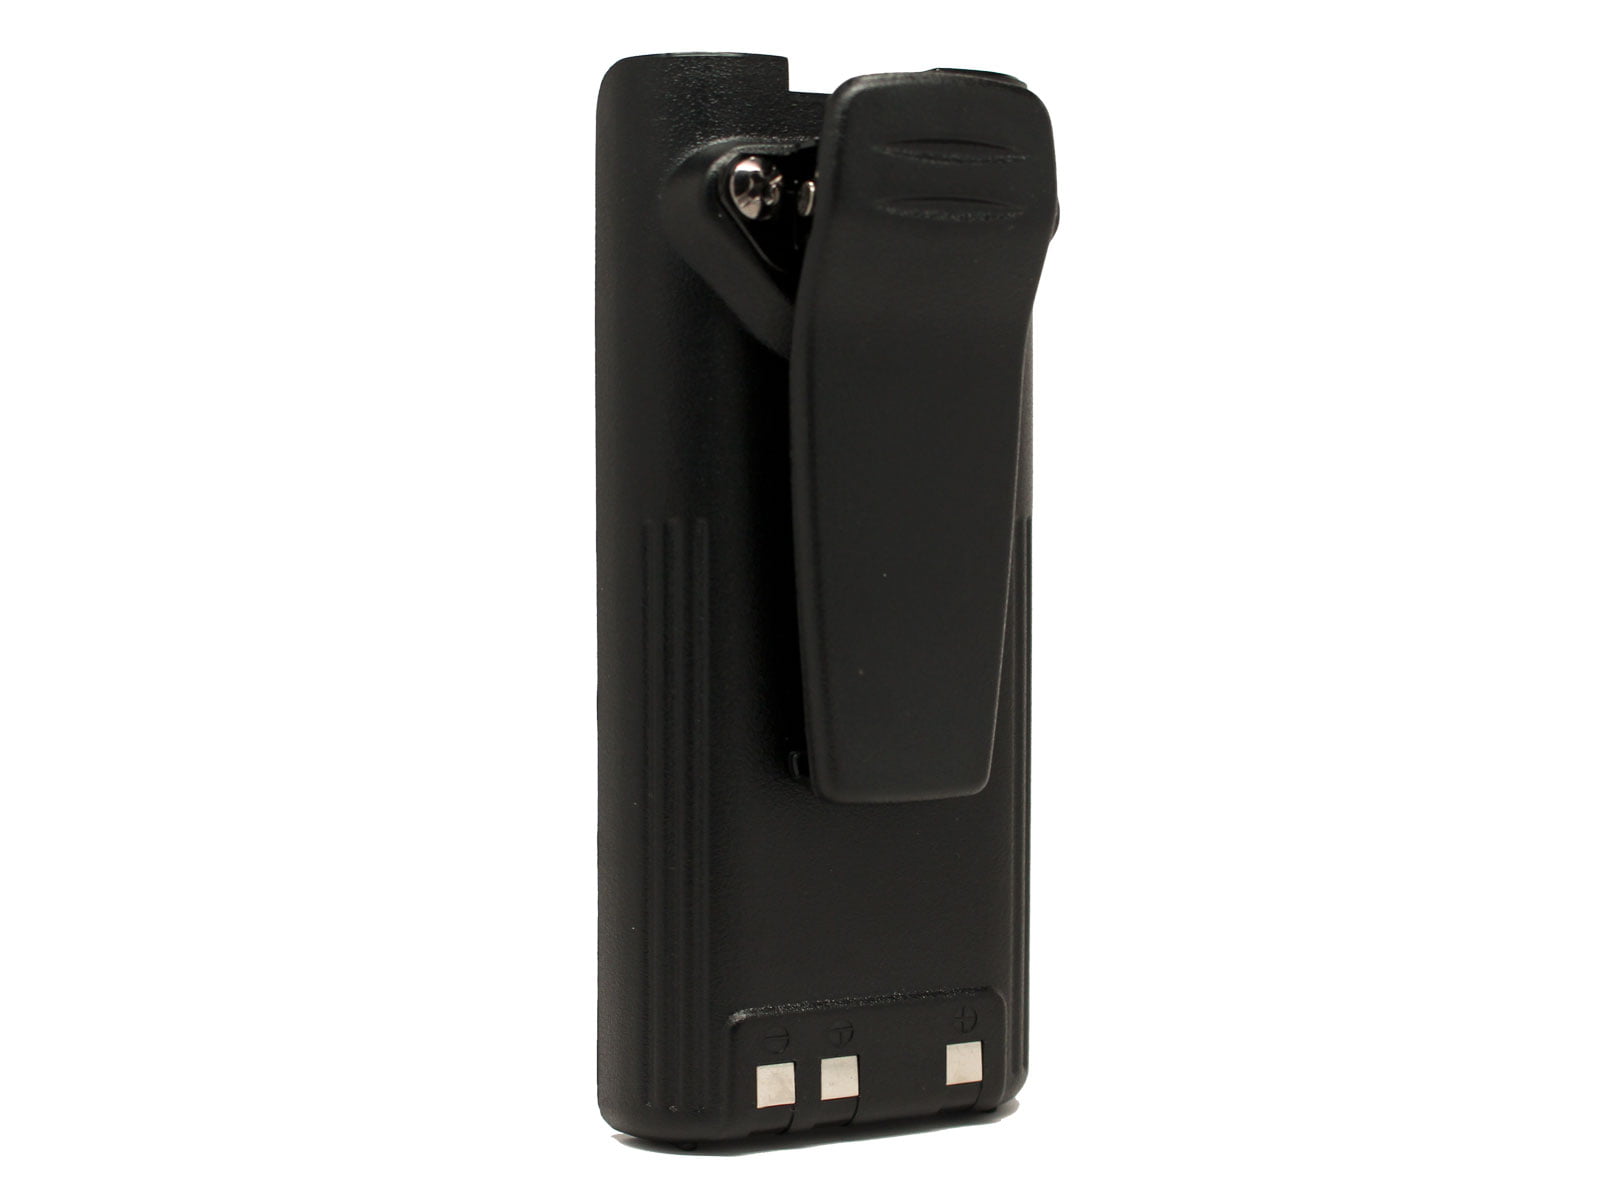 1600mAh, 7.2V, NI-MH Compatible with Icom BP-210 Two-Way Radio Battery Replacement for Icom BP-209 Battery 